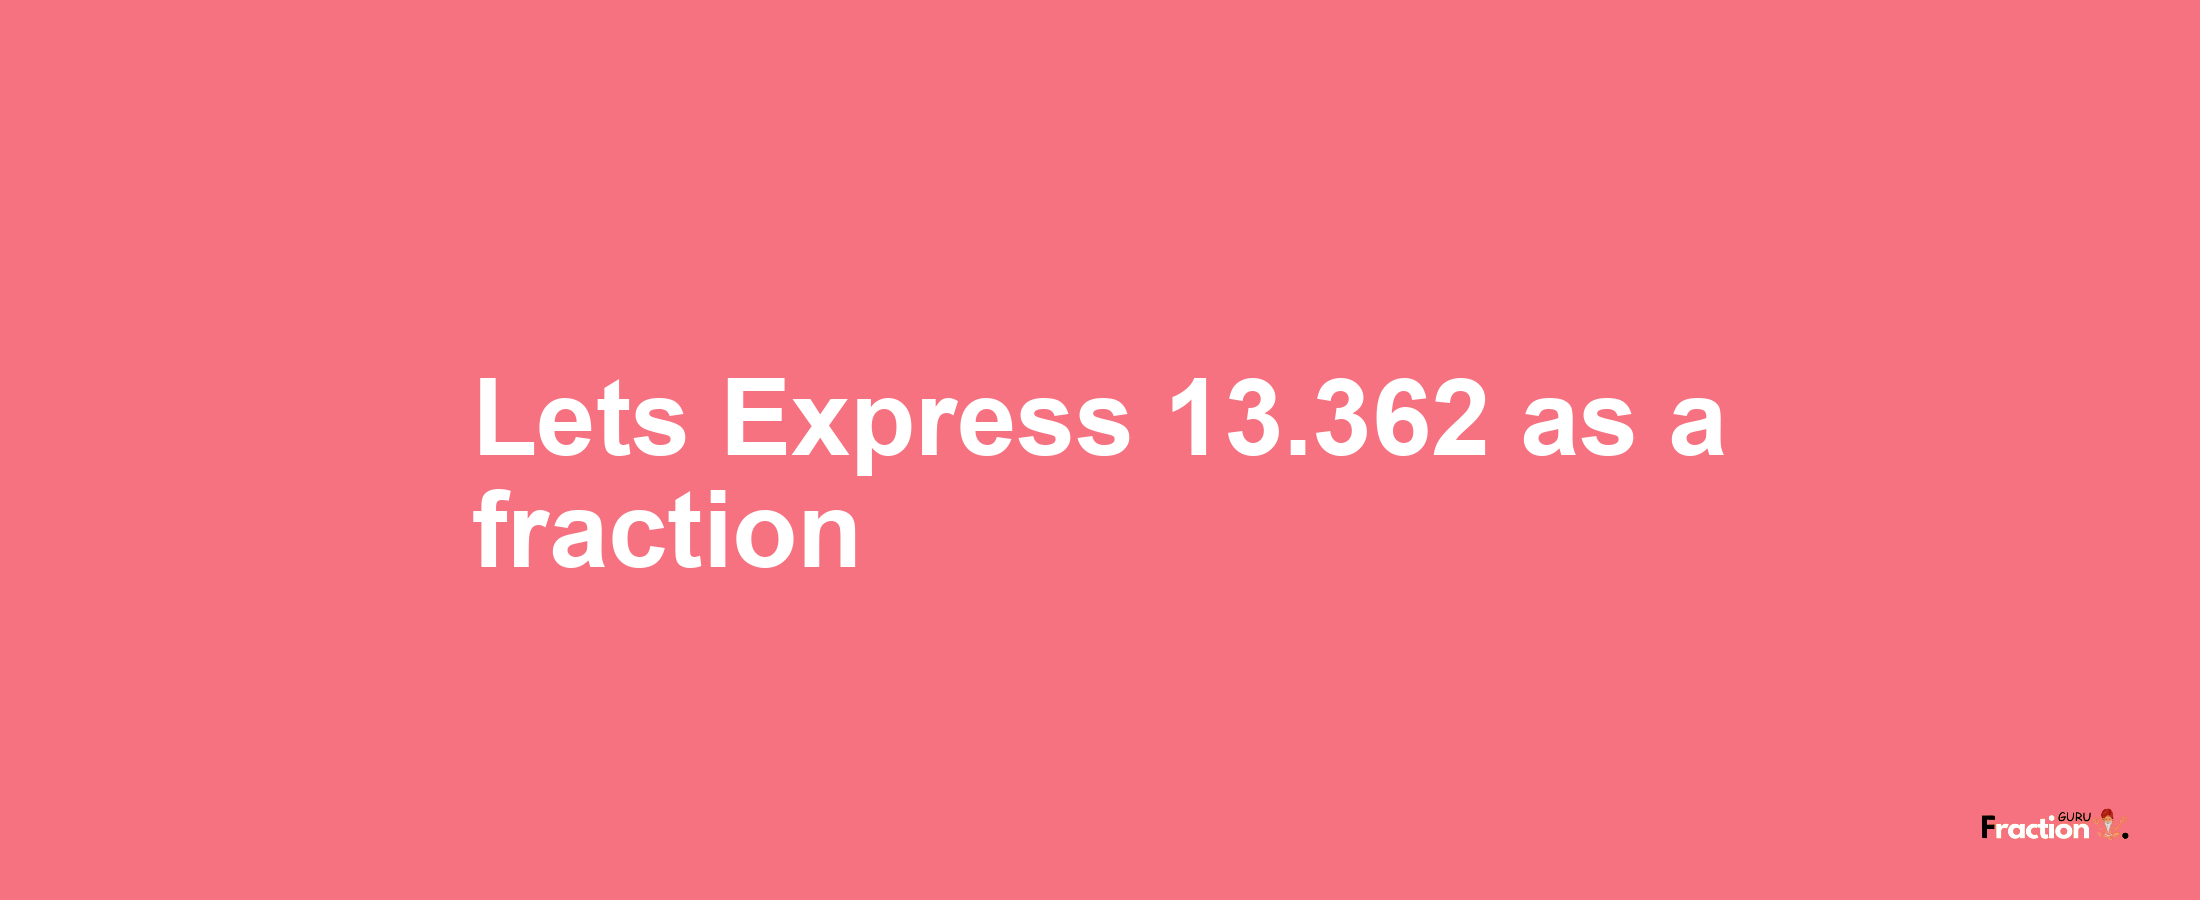 Lets Express 13.362 as afraction